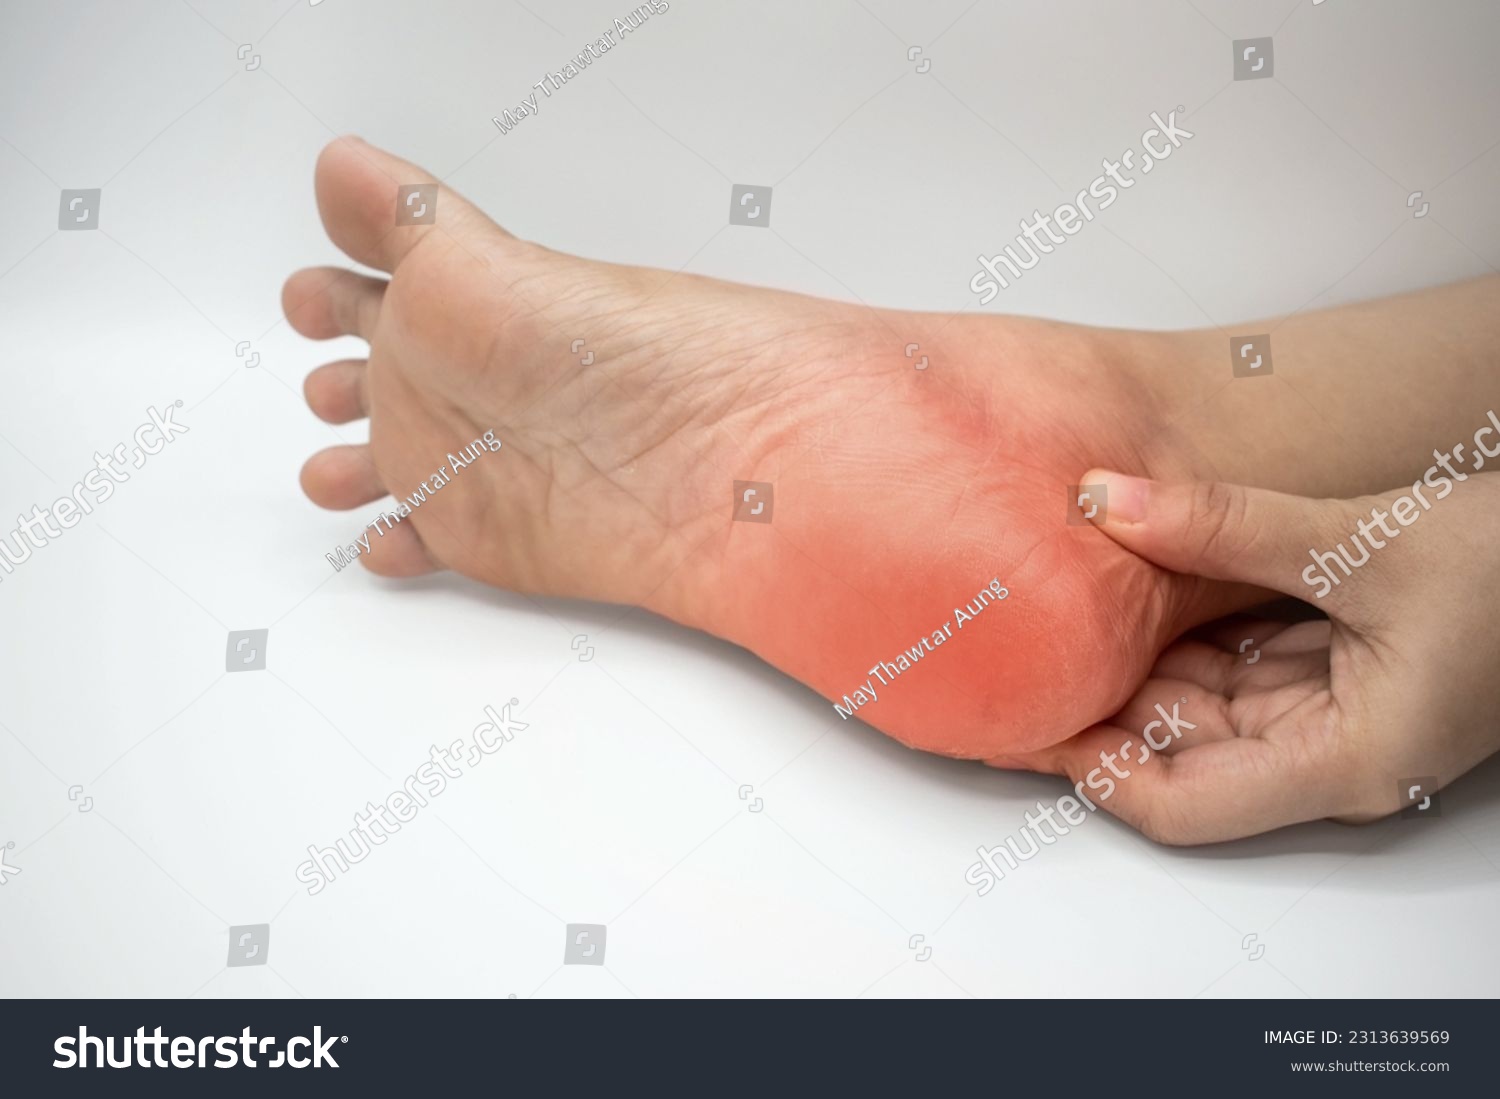 Inflammation at heel of Asian young woman. Concept of foot pain, plantar fasciitis, achilles tendonitis or heel spurs. #2313639569